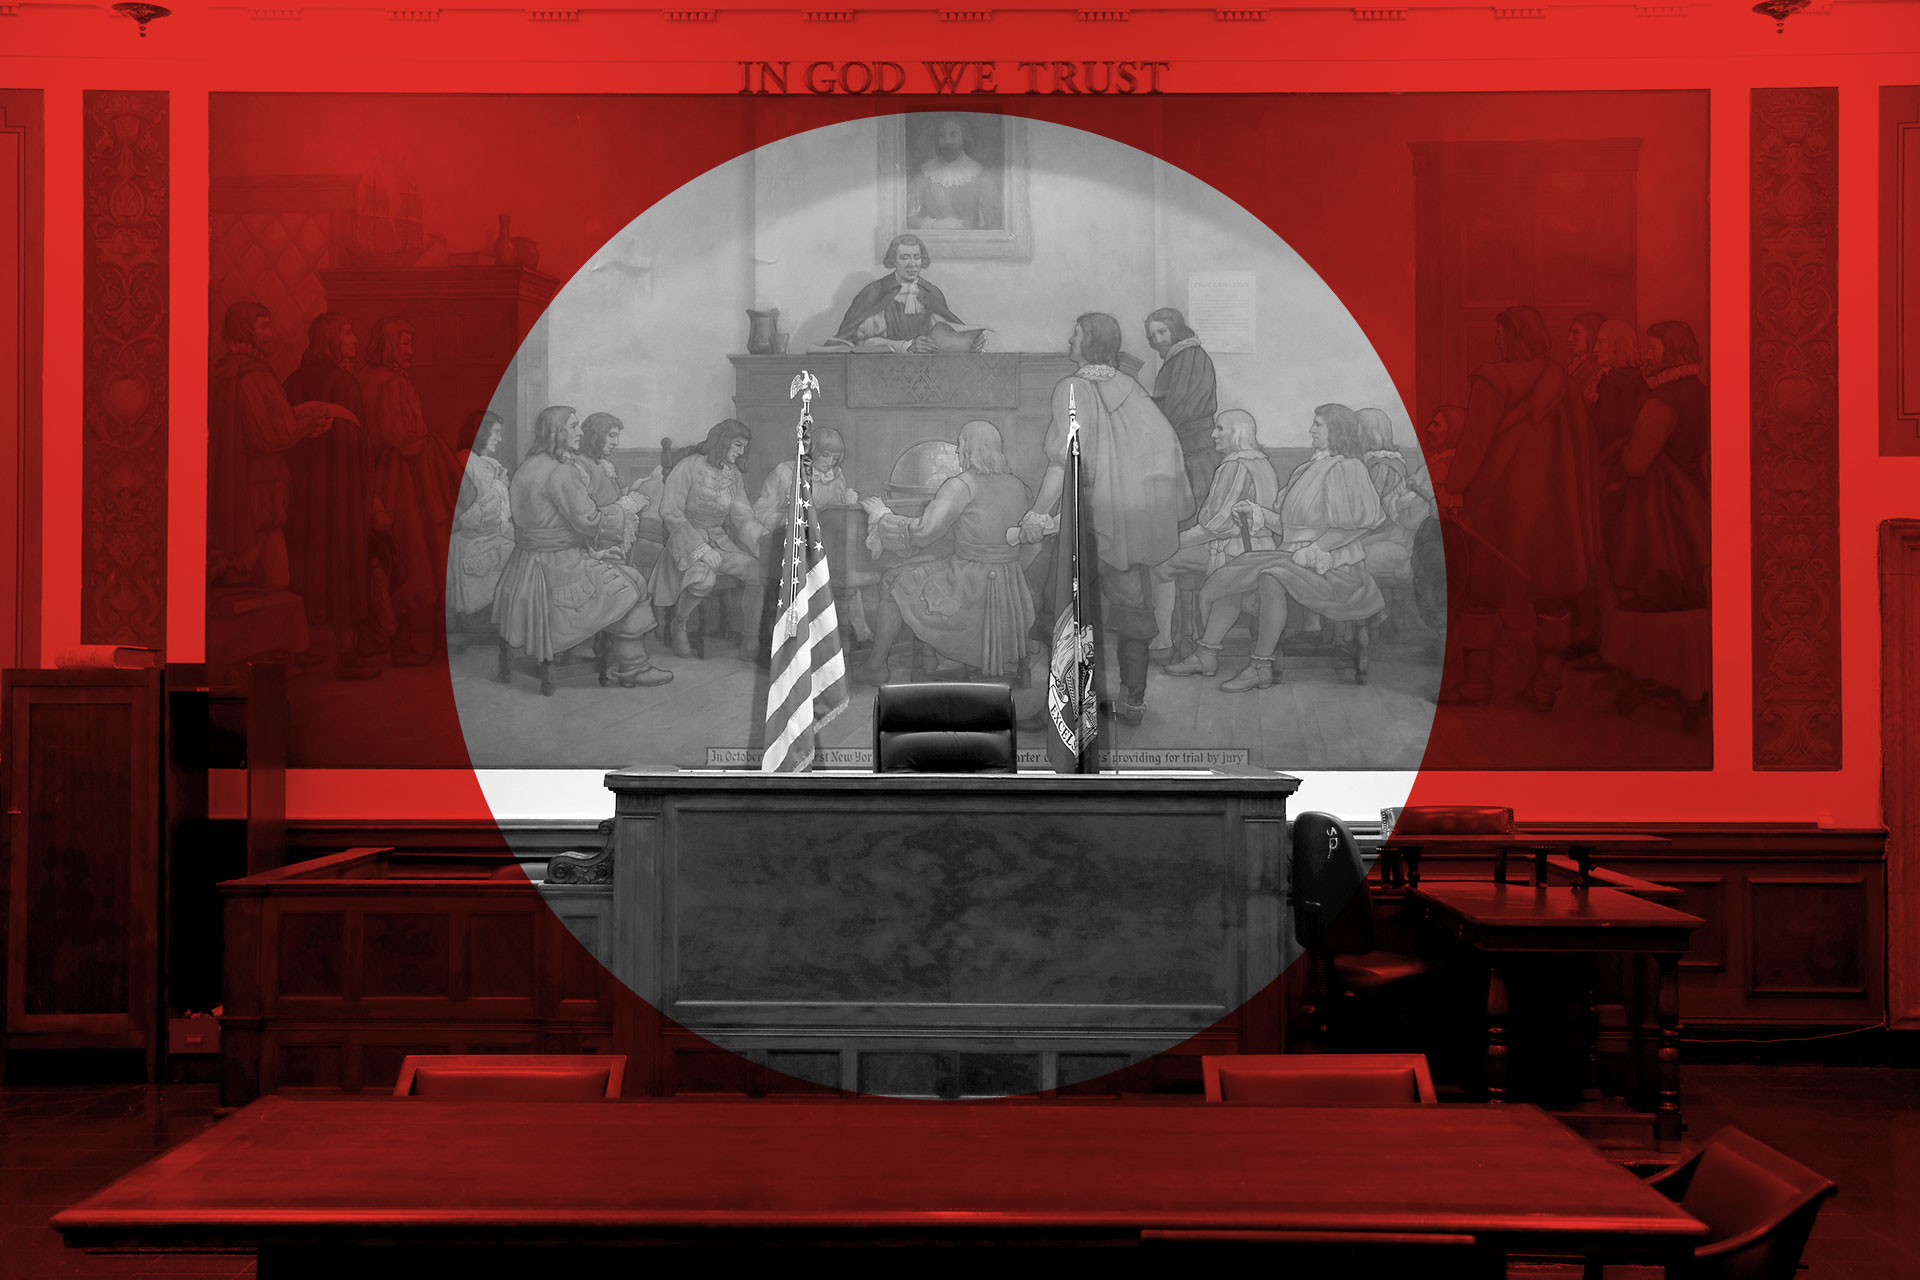 The New York County Supreme Court where Justice Arthur Engoron sits is one of many that have become a target for a campaign of threats and intimidation waged by loyalists of former president Donald Trump. REUTERS/Andrew Kelly. Illustration: John Emerson